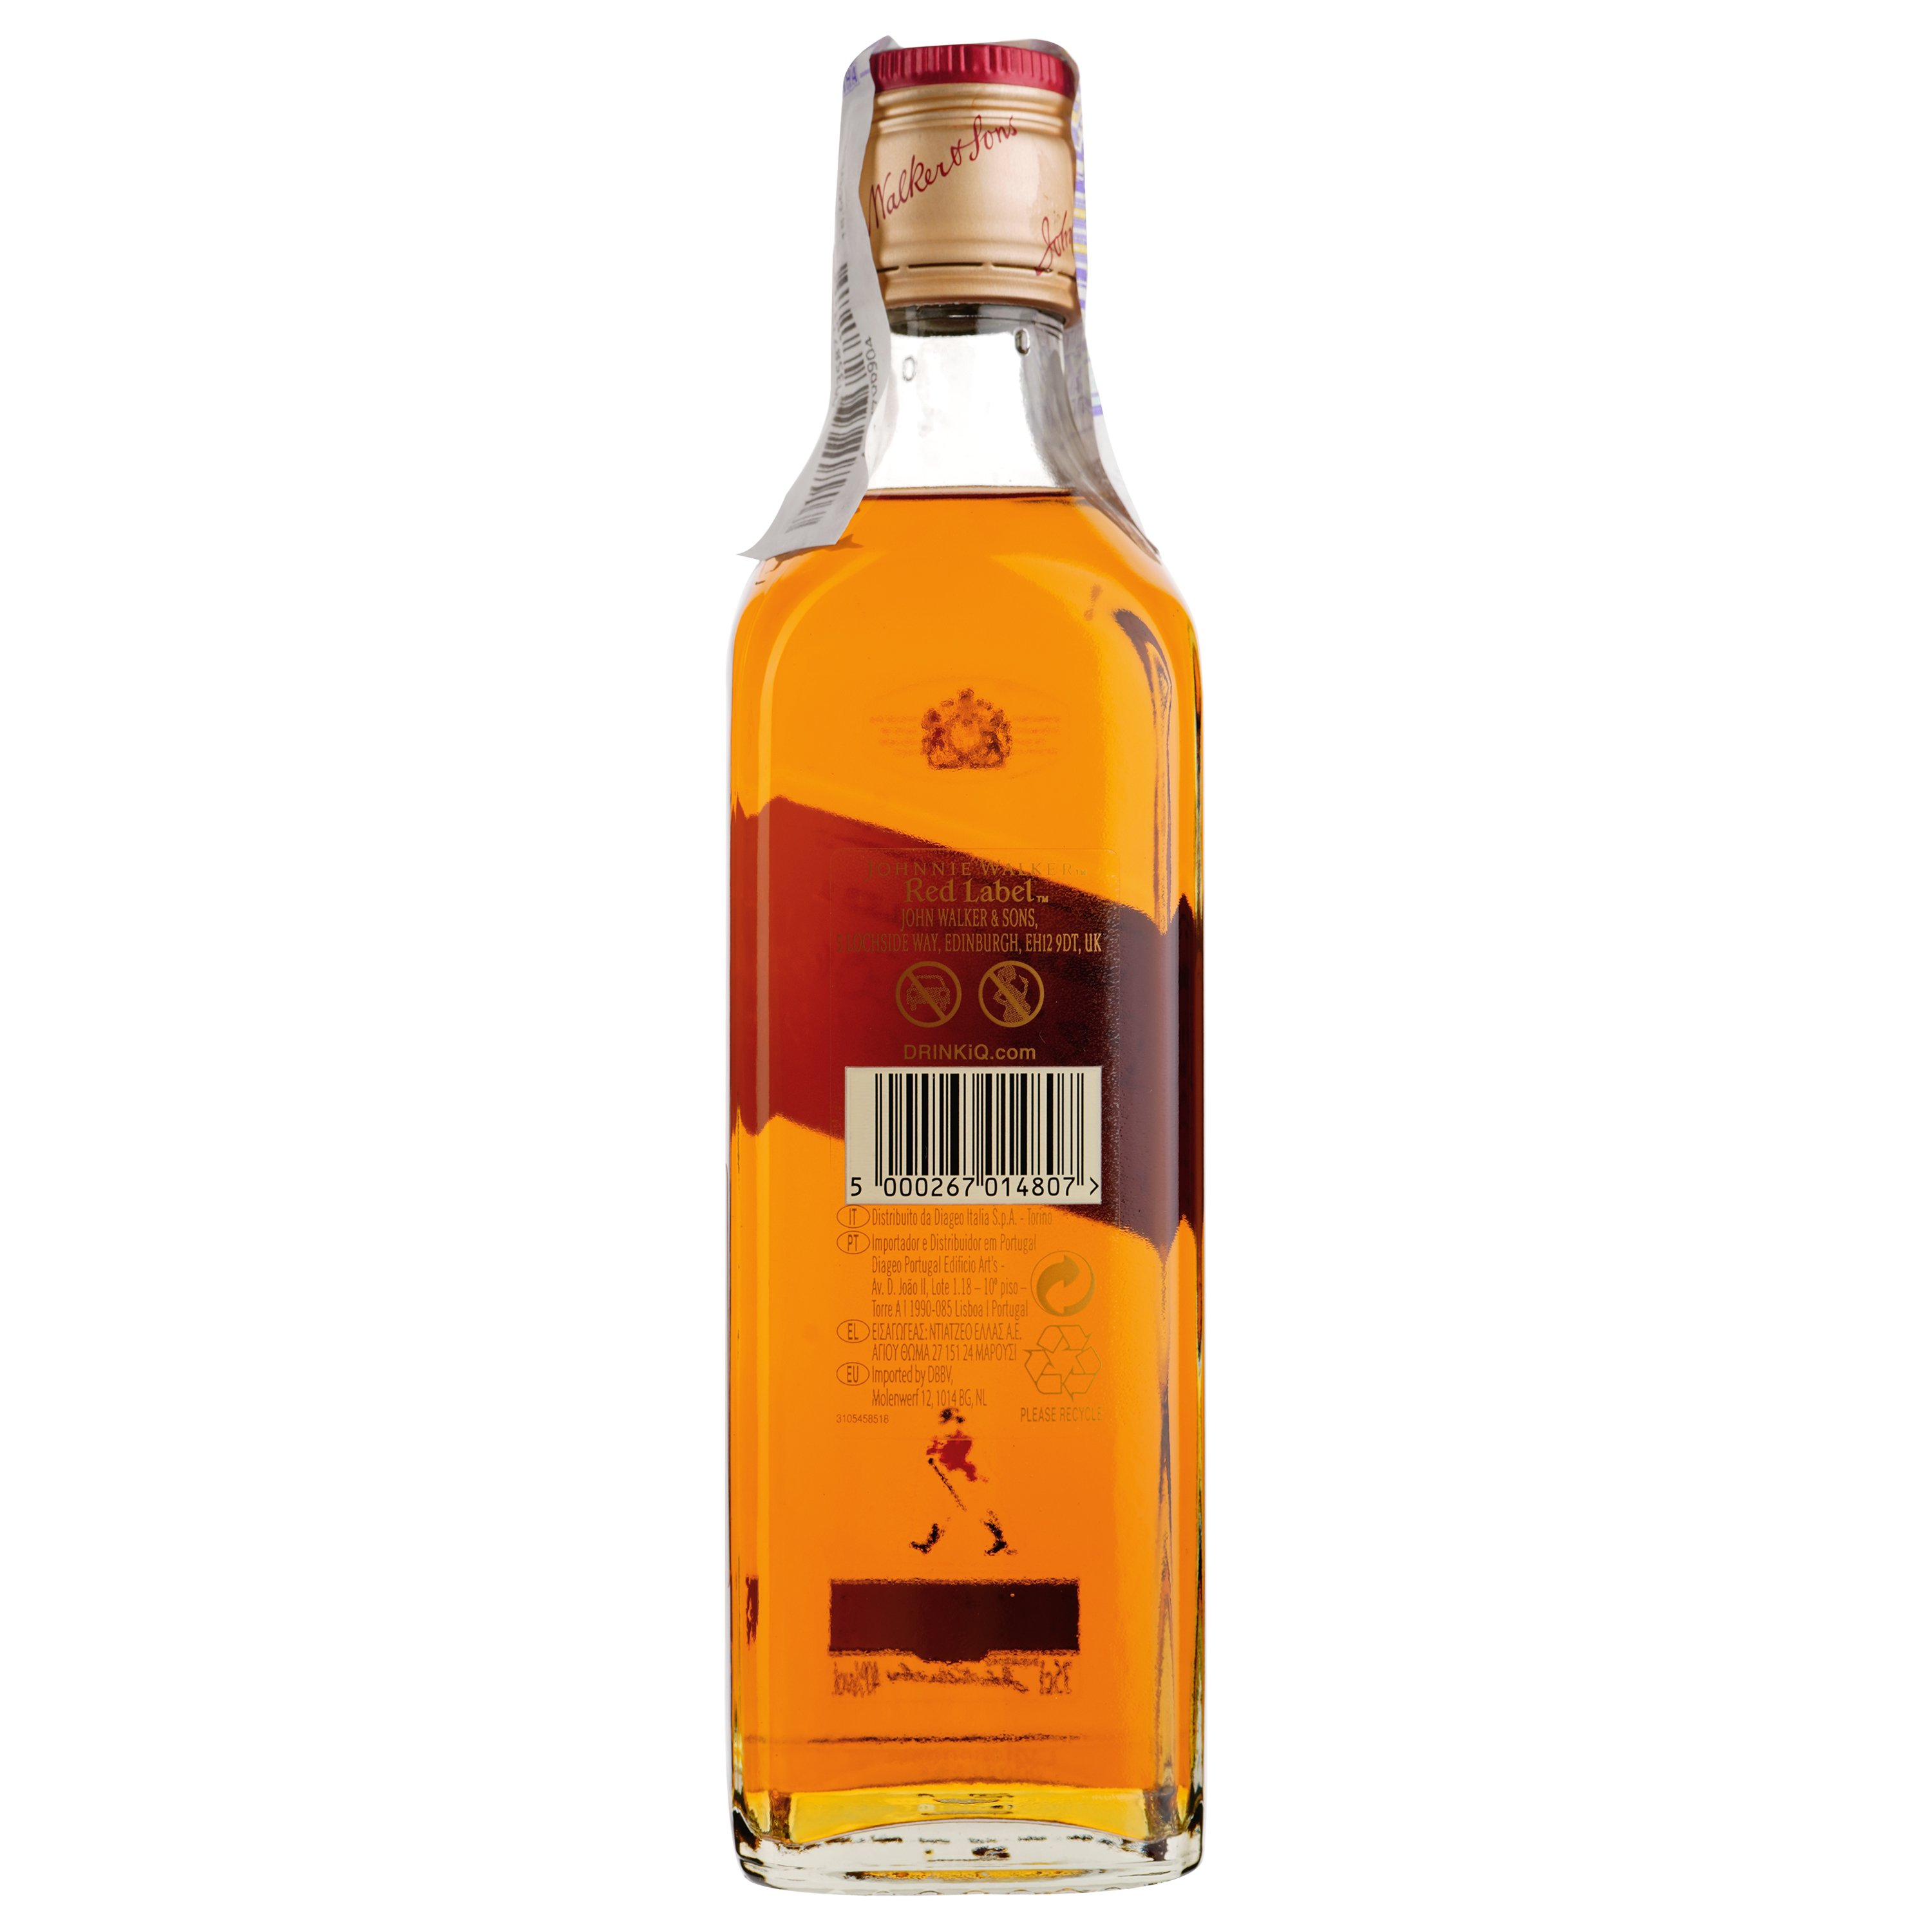 Виски Johnnie Walker Red label Blended Scotch Whisky, 0,35 л, 40% (481369) - фото 2